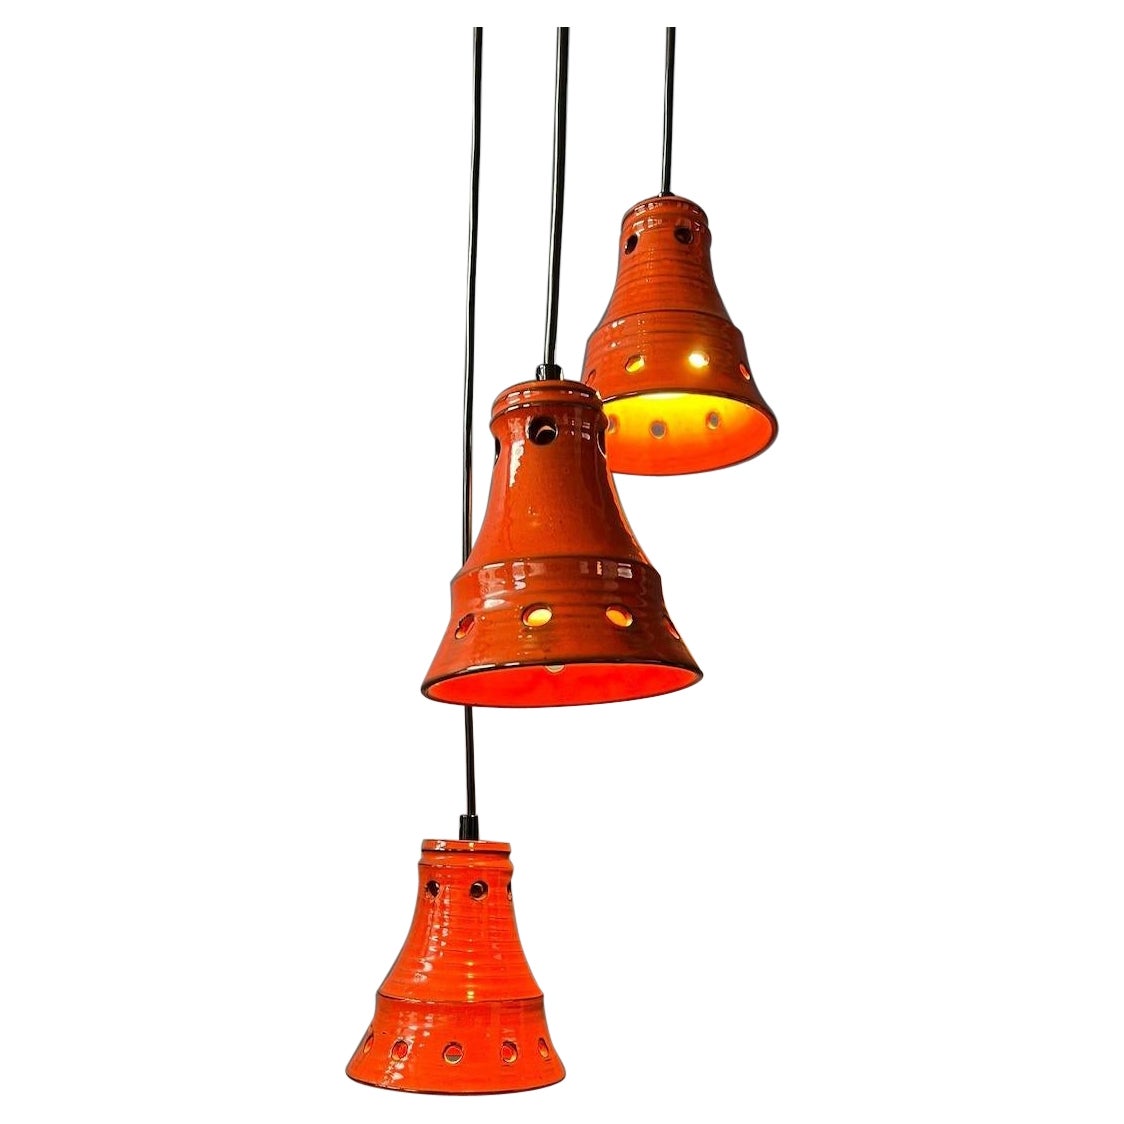 Orange West Germany Ceramic Cascade Chandelier with Three Pendant Lights, 1970s For Sale